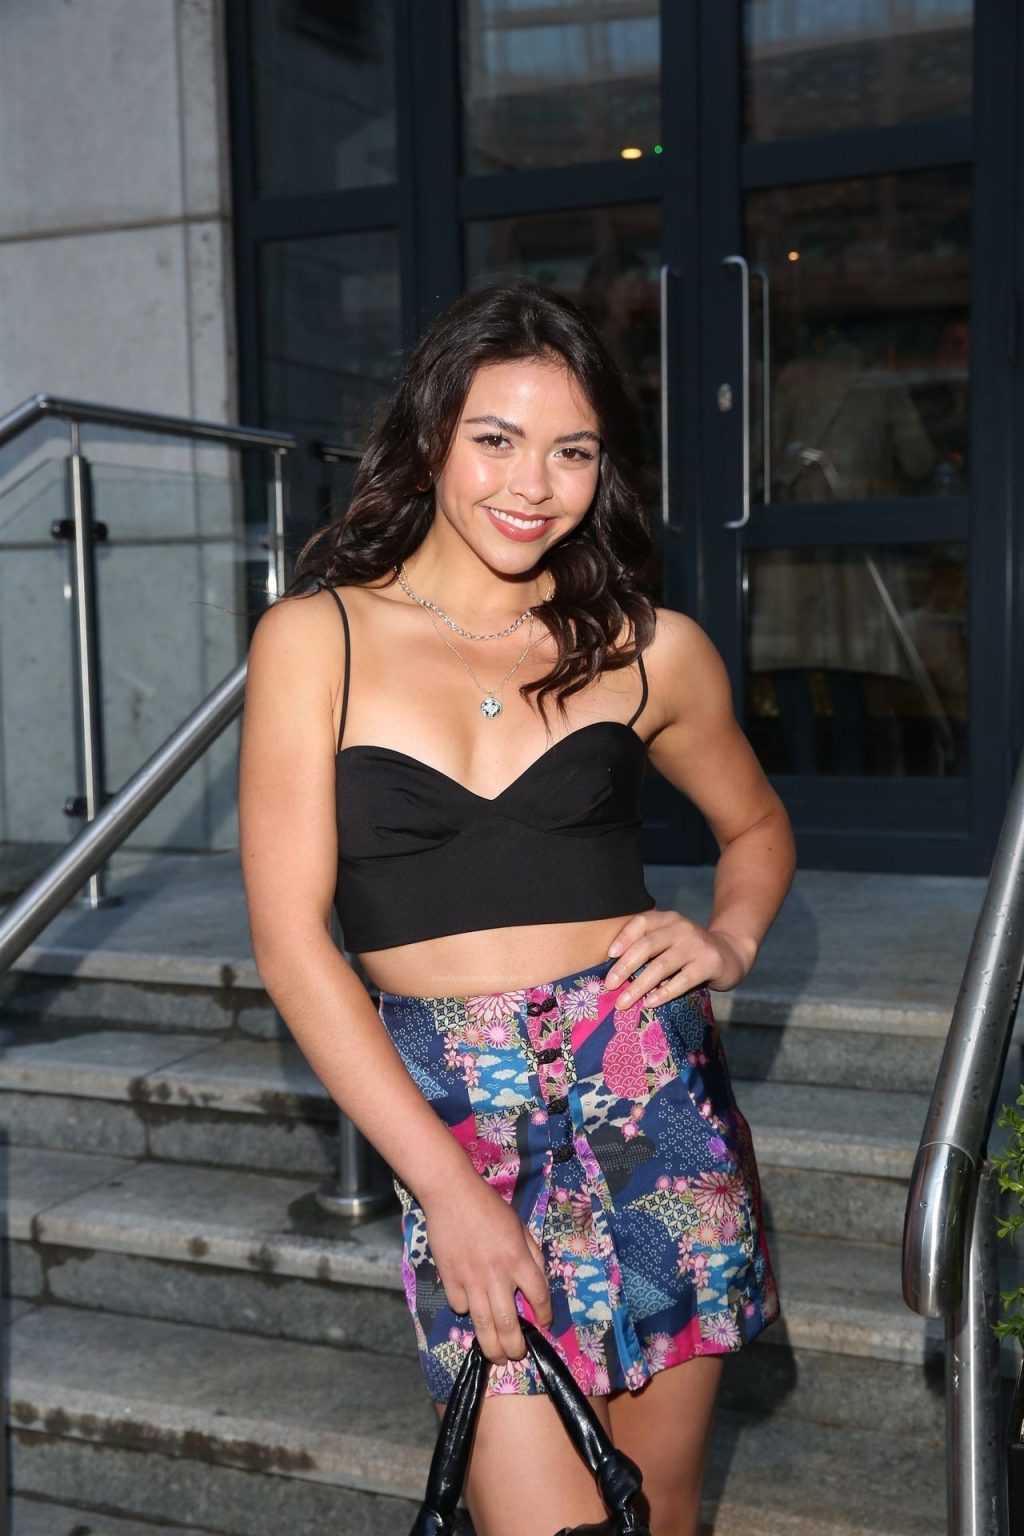 Leggy Vanessa Bauer Poses in a Tiny Cropped Top and Mini Skirt in London (37 Photos)